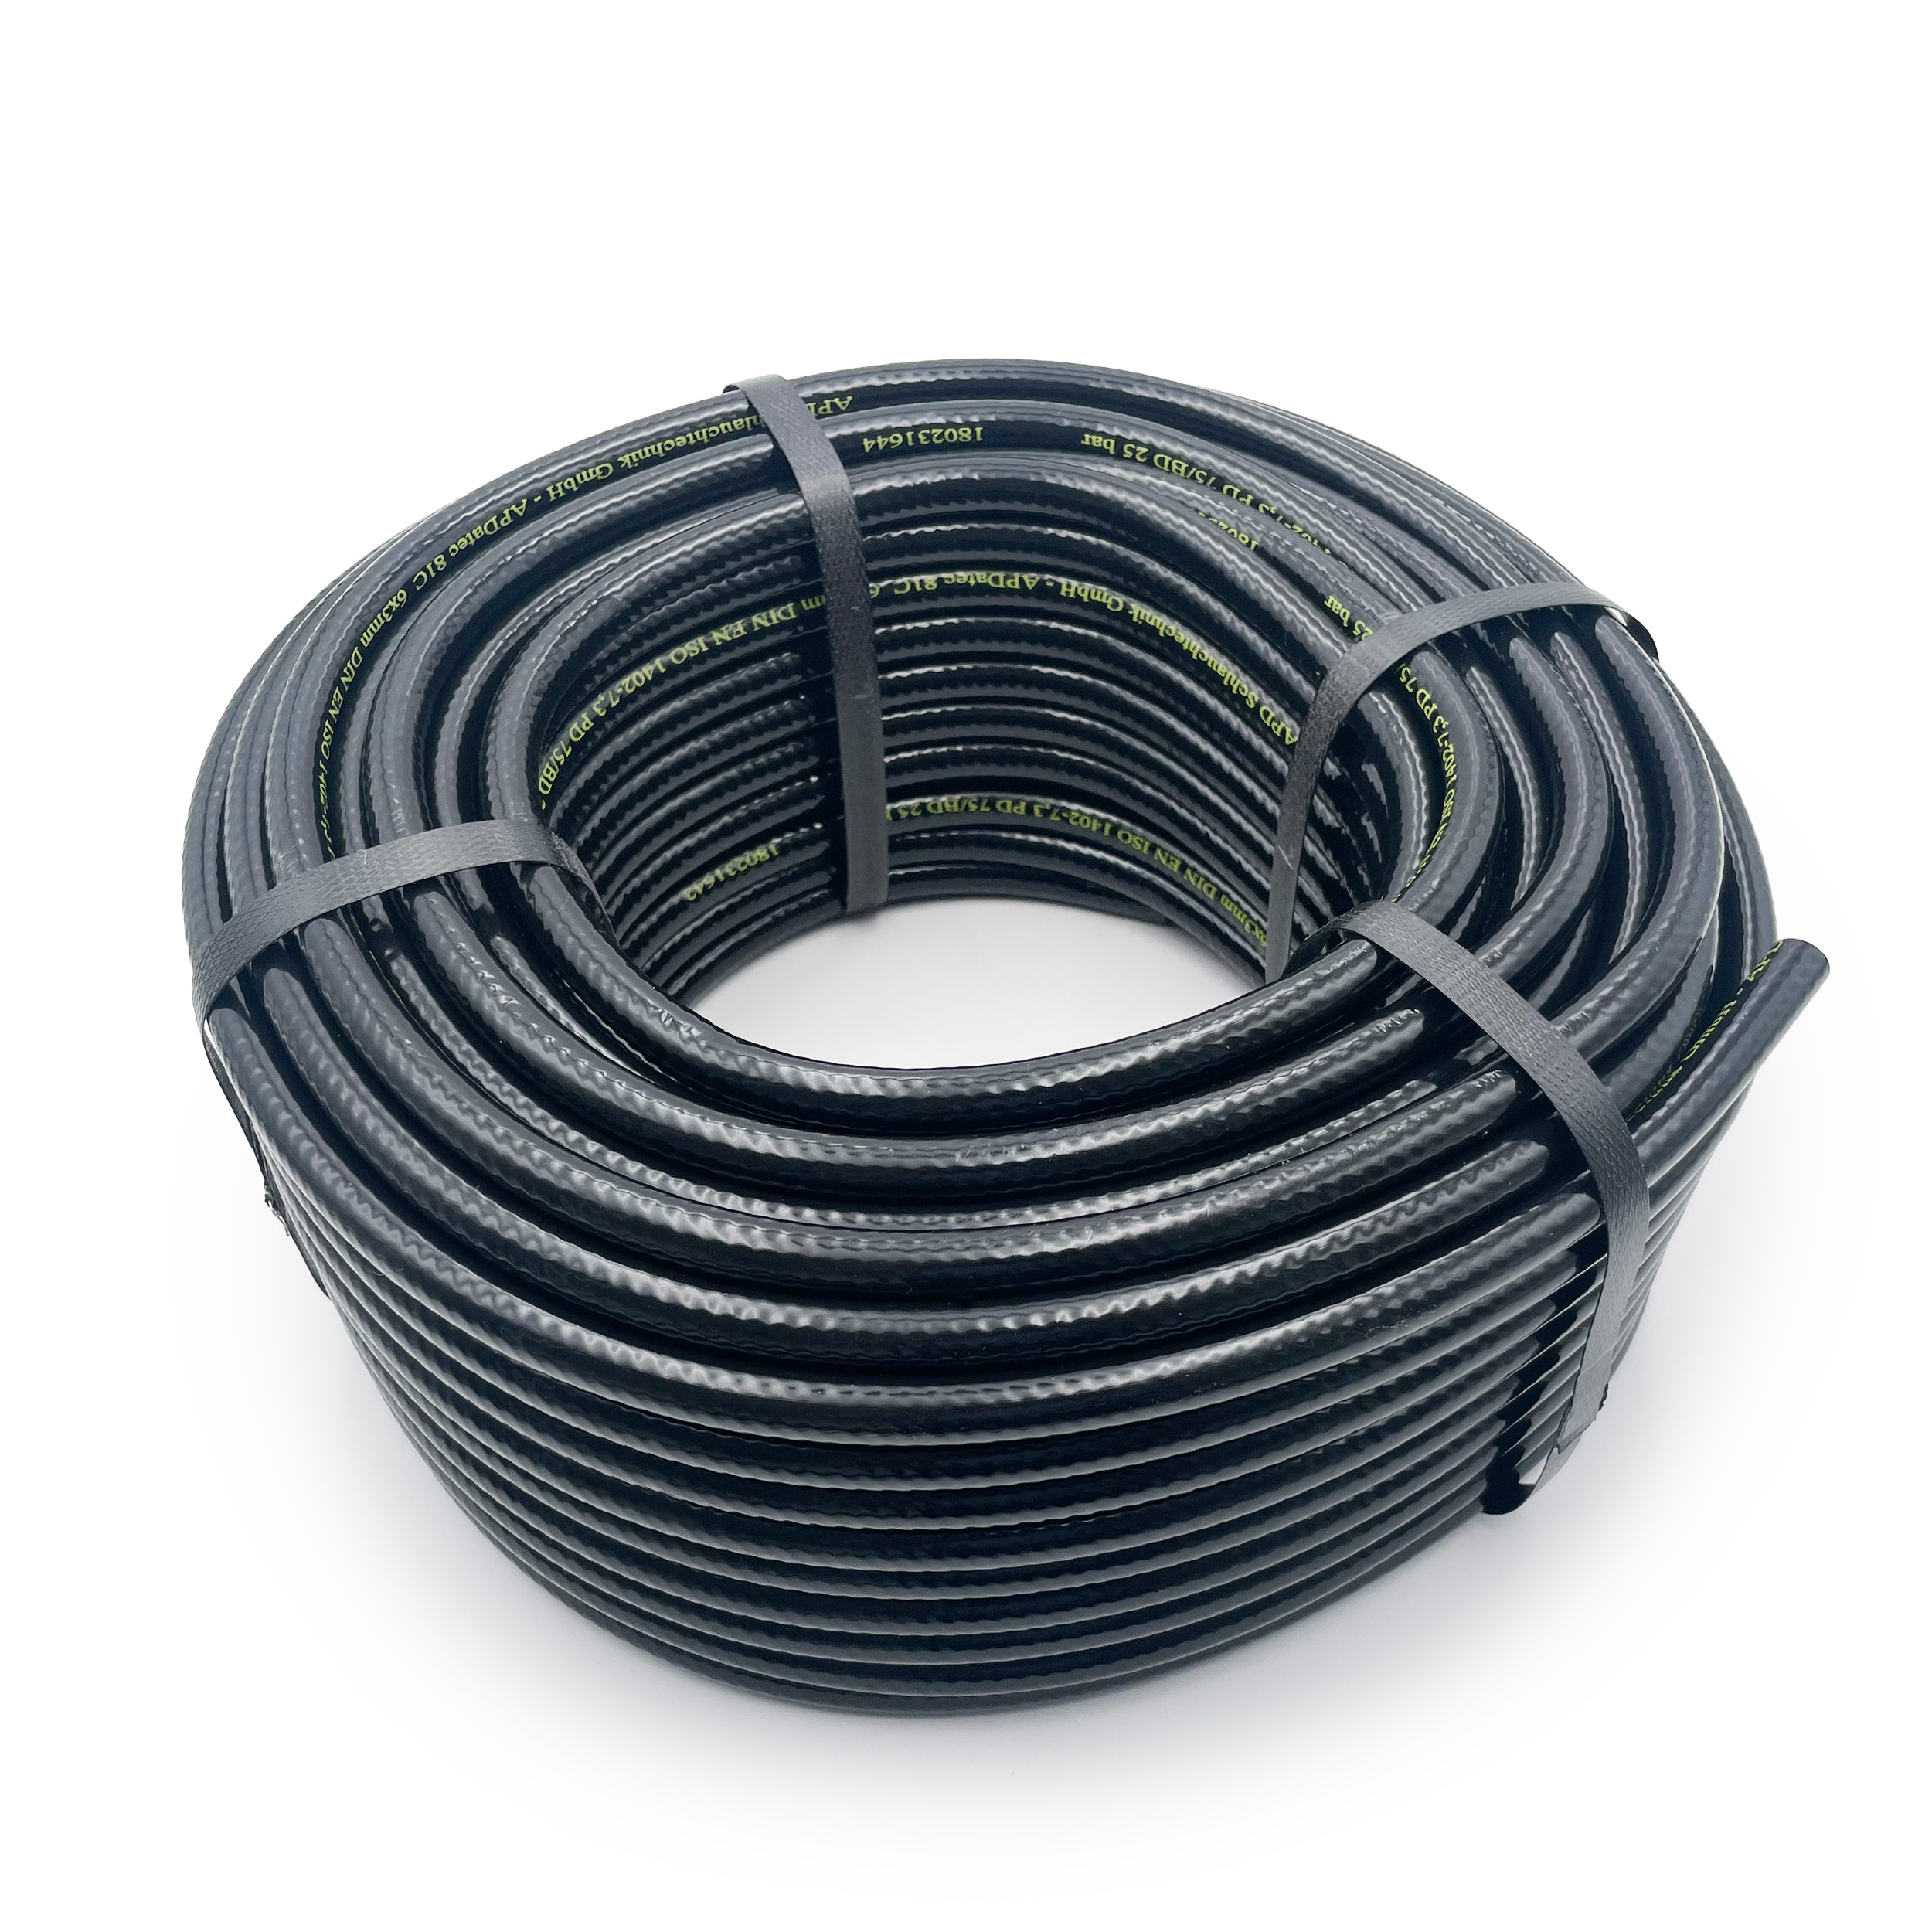 PVC compressed air hose, roll 50 m, without connectors